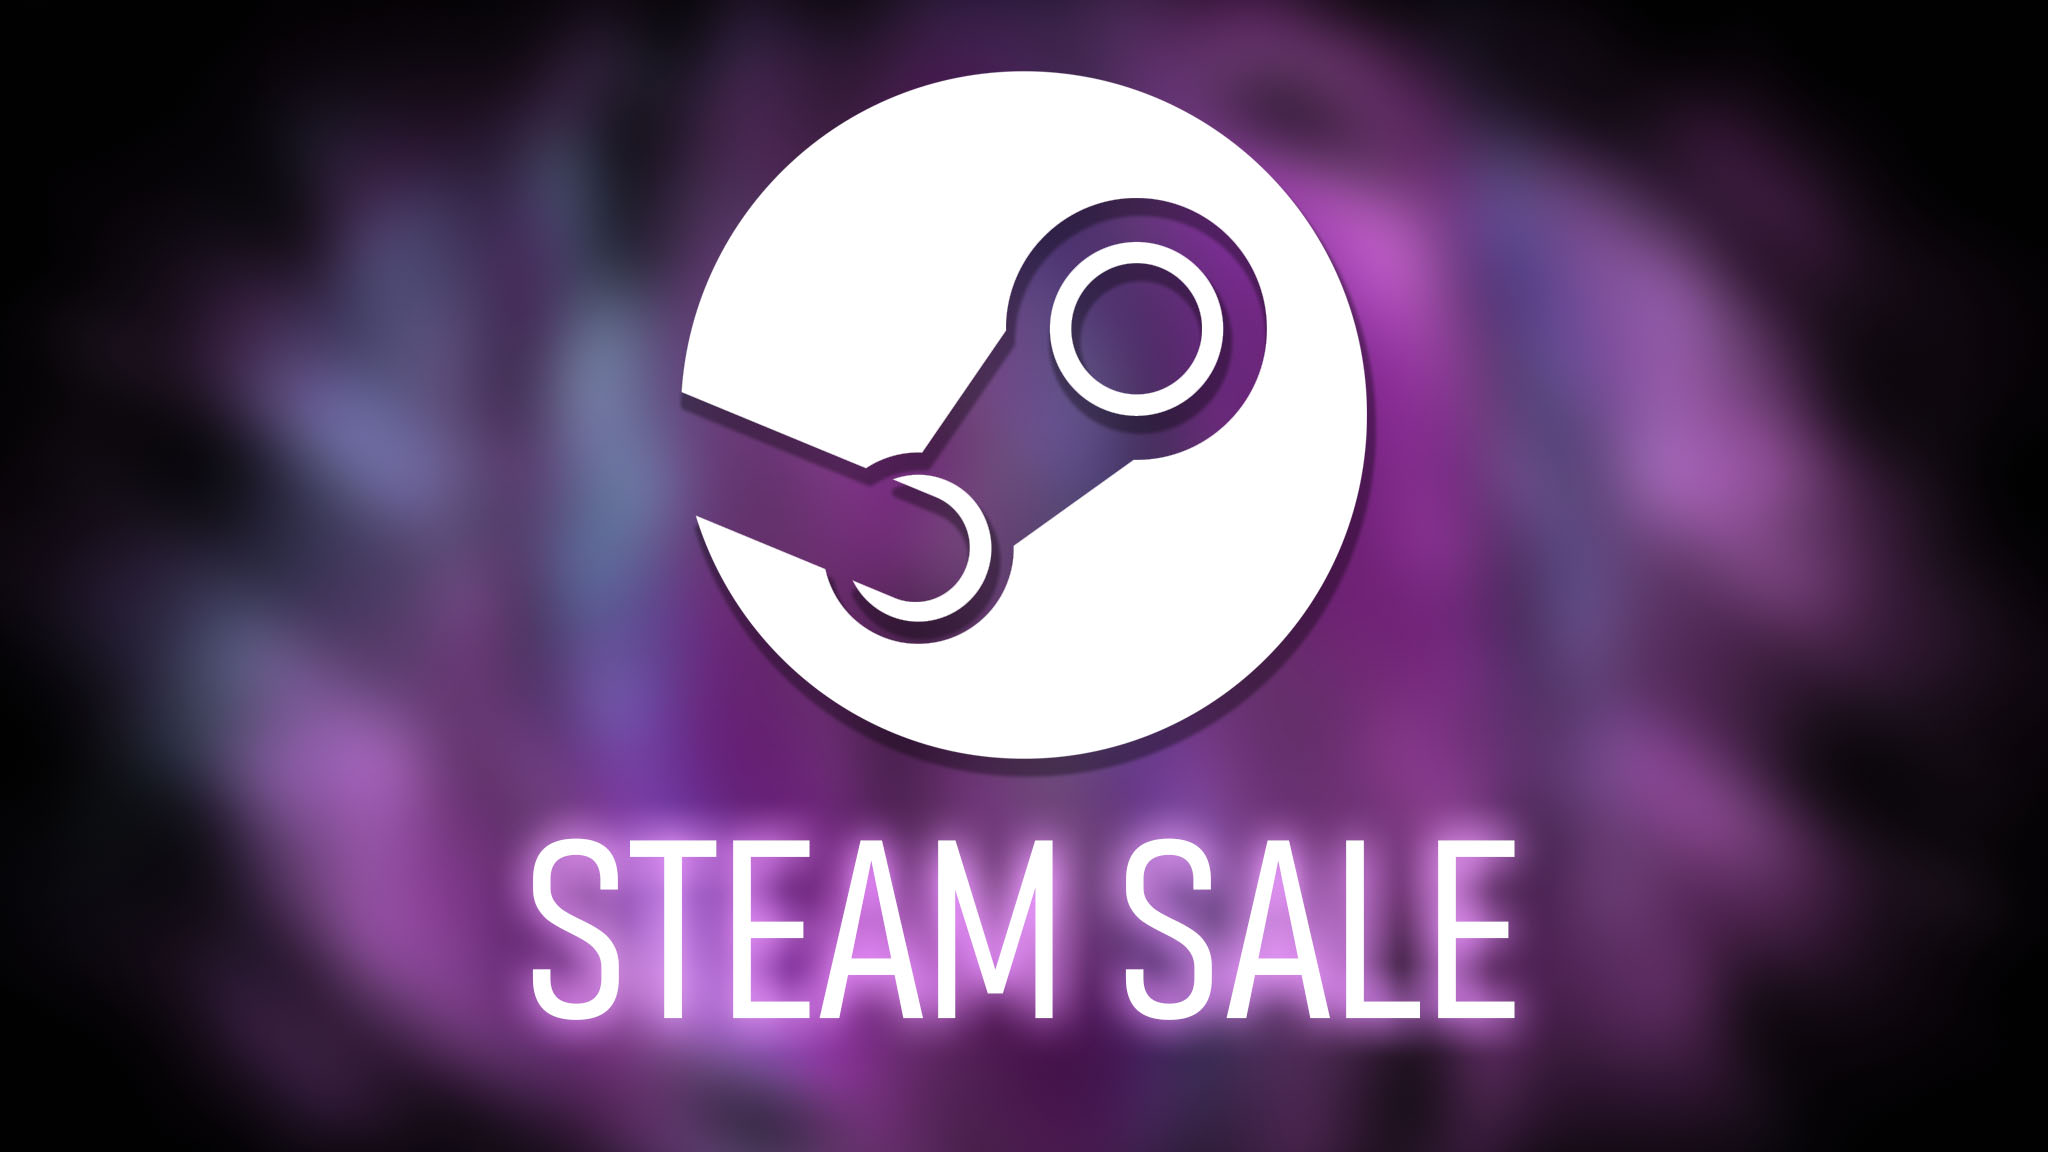 Here are the best Steam Winter Sale game deals going on now for PC